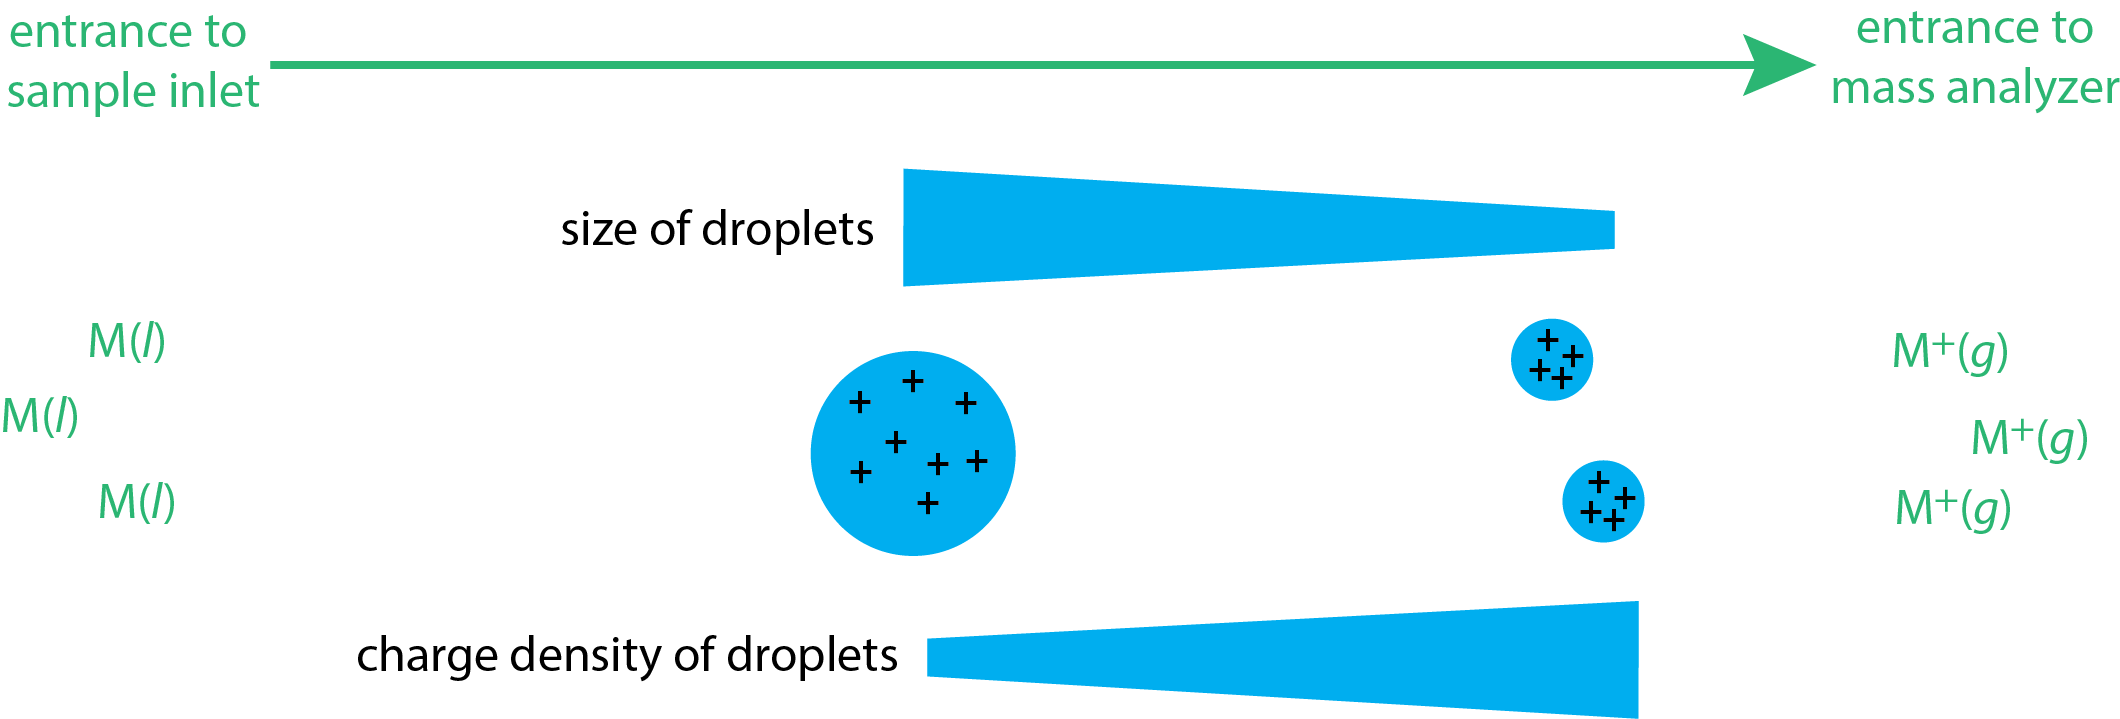 Illustration showing the change in the size of droplets and the charge density of droplets during electrospray ionization.